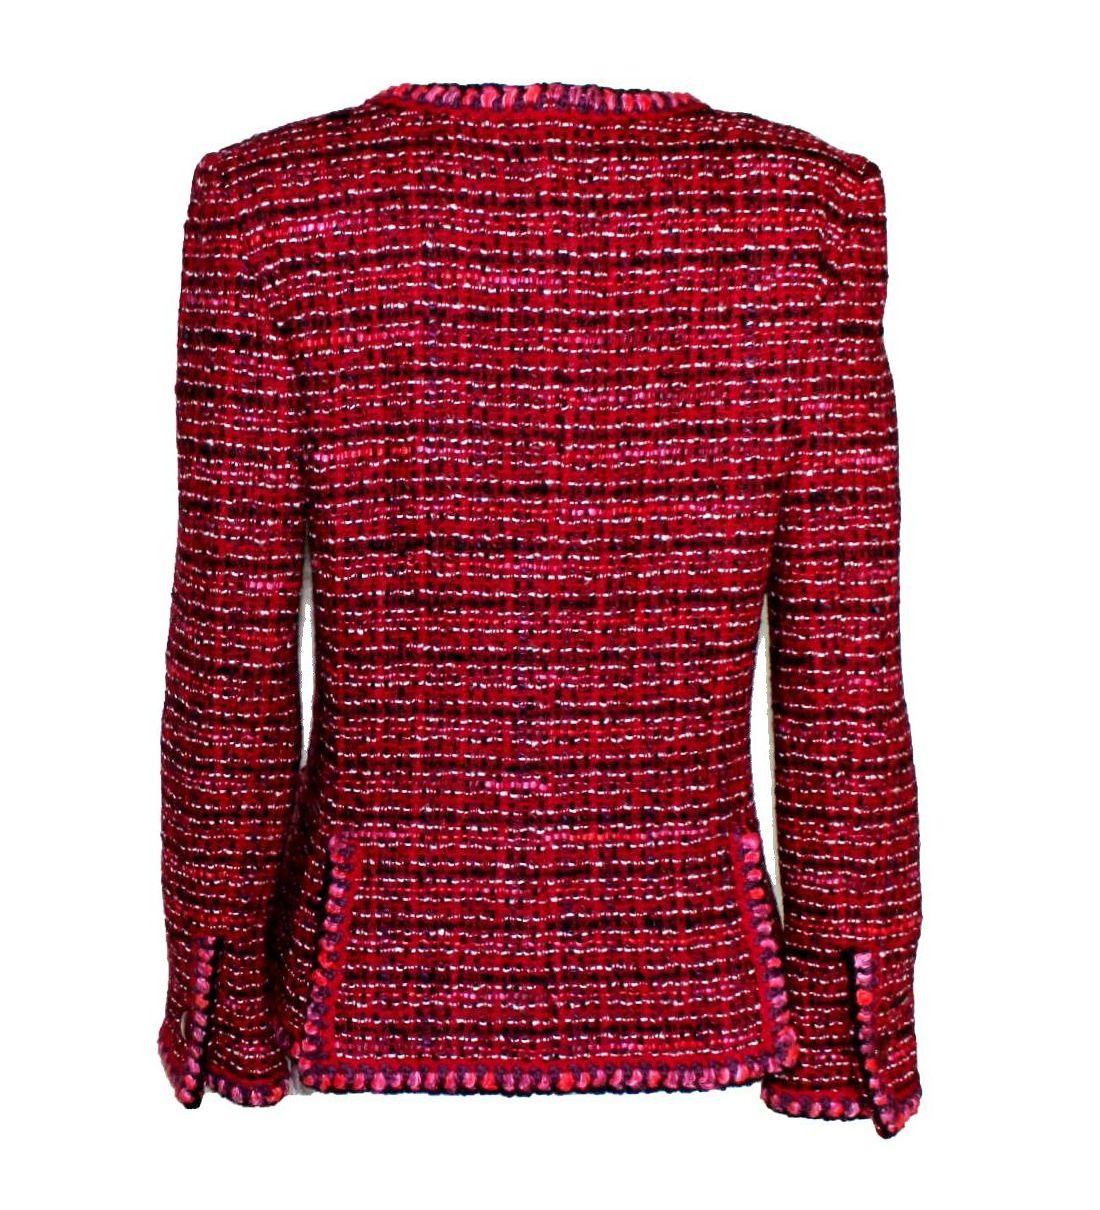 
BEAUTIFUL CHANEL TWEED JACKET

A TRUE CHANEL PIECE THAT SHOULD BE IN EVERY WOMAN'S WARDROBE

SO GORGEOUS

DETAILS:

        Perfect to be worn casual with jeans or dressed up - an iconic CHANEL jacket
        Beautiful CHANEL tweed jacket 
       